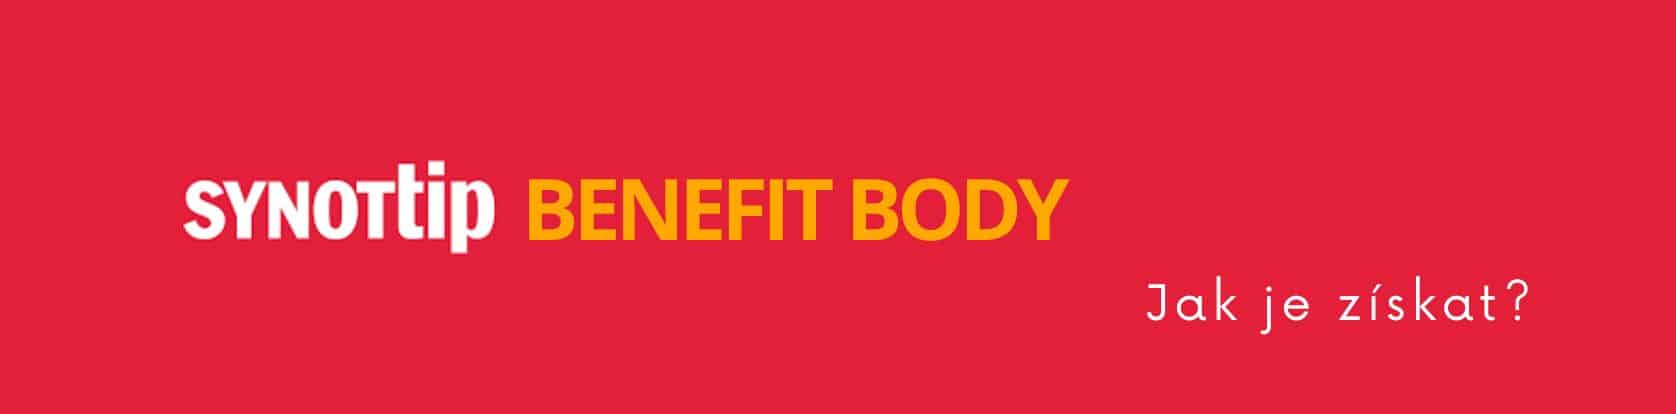 Synottip benefit body